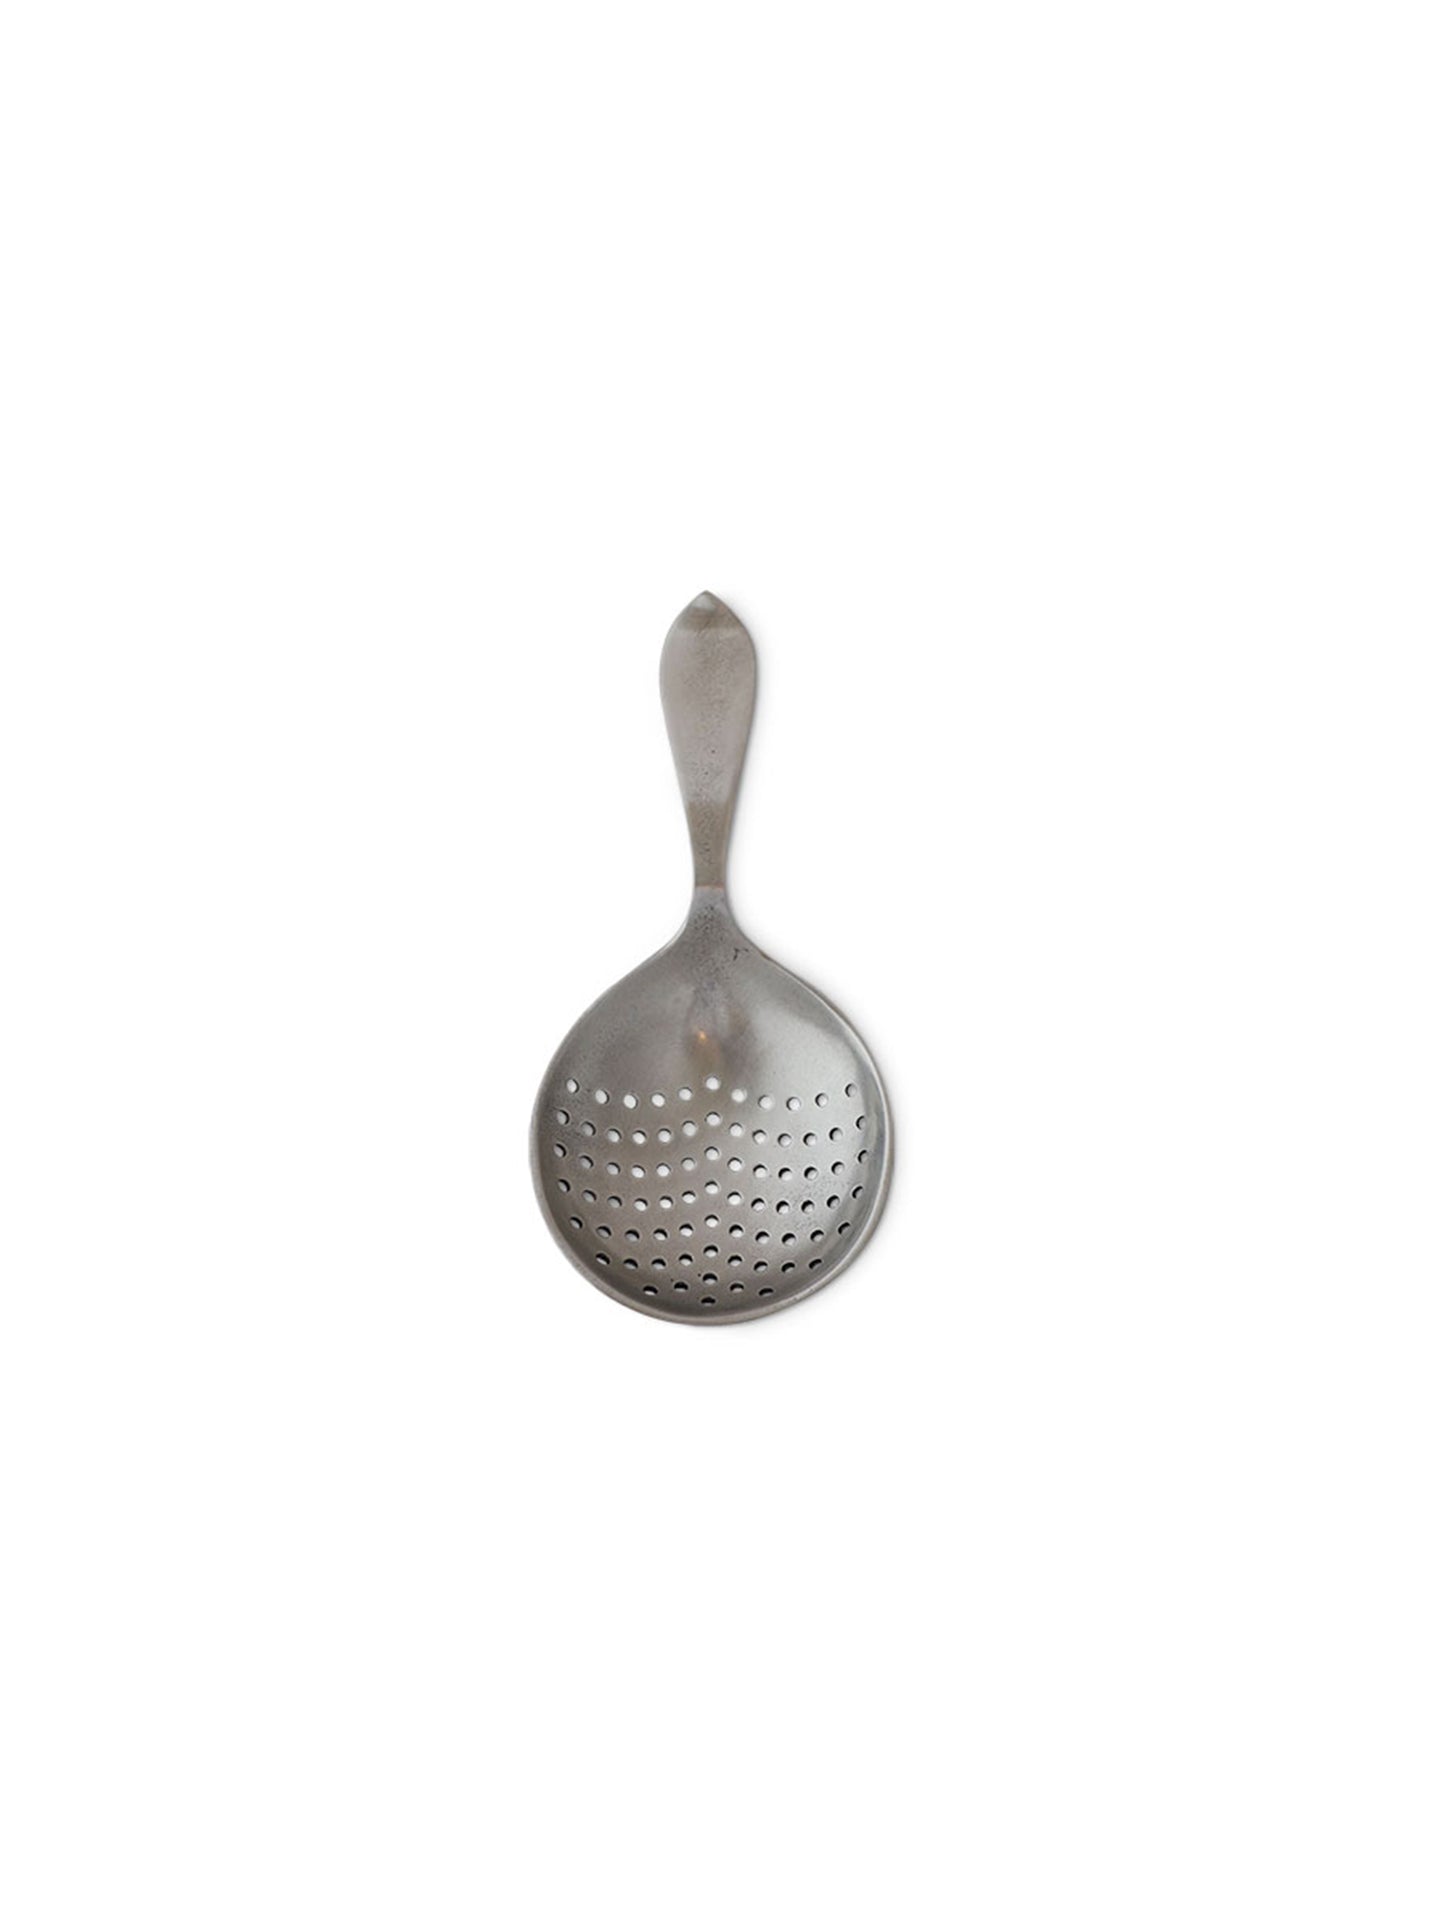 MATCH Pewter Cocktail Strainer Weston Table